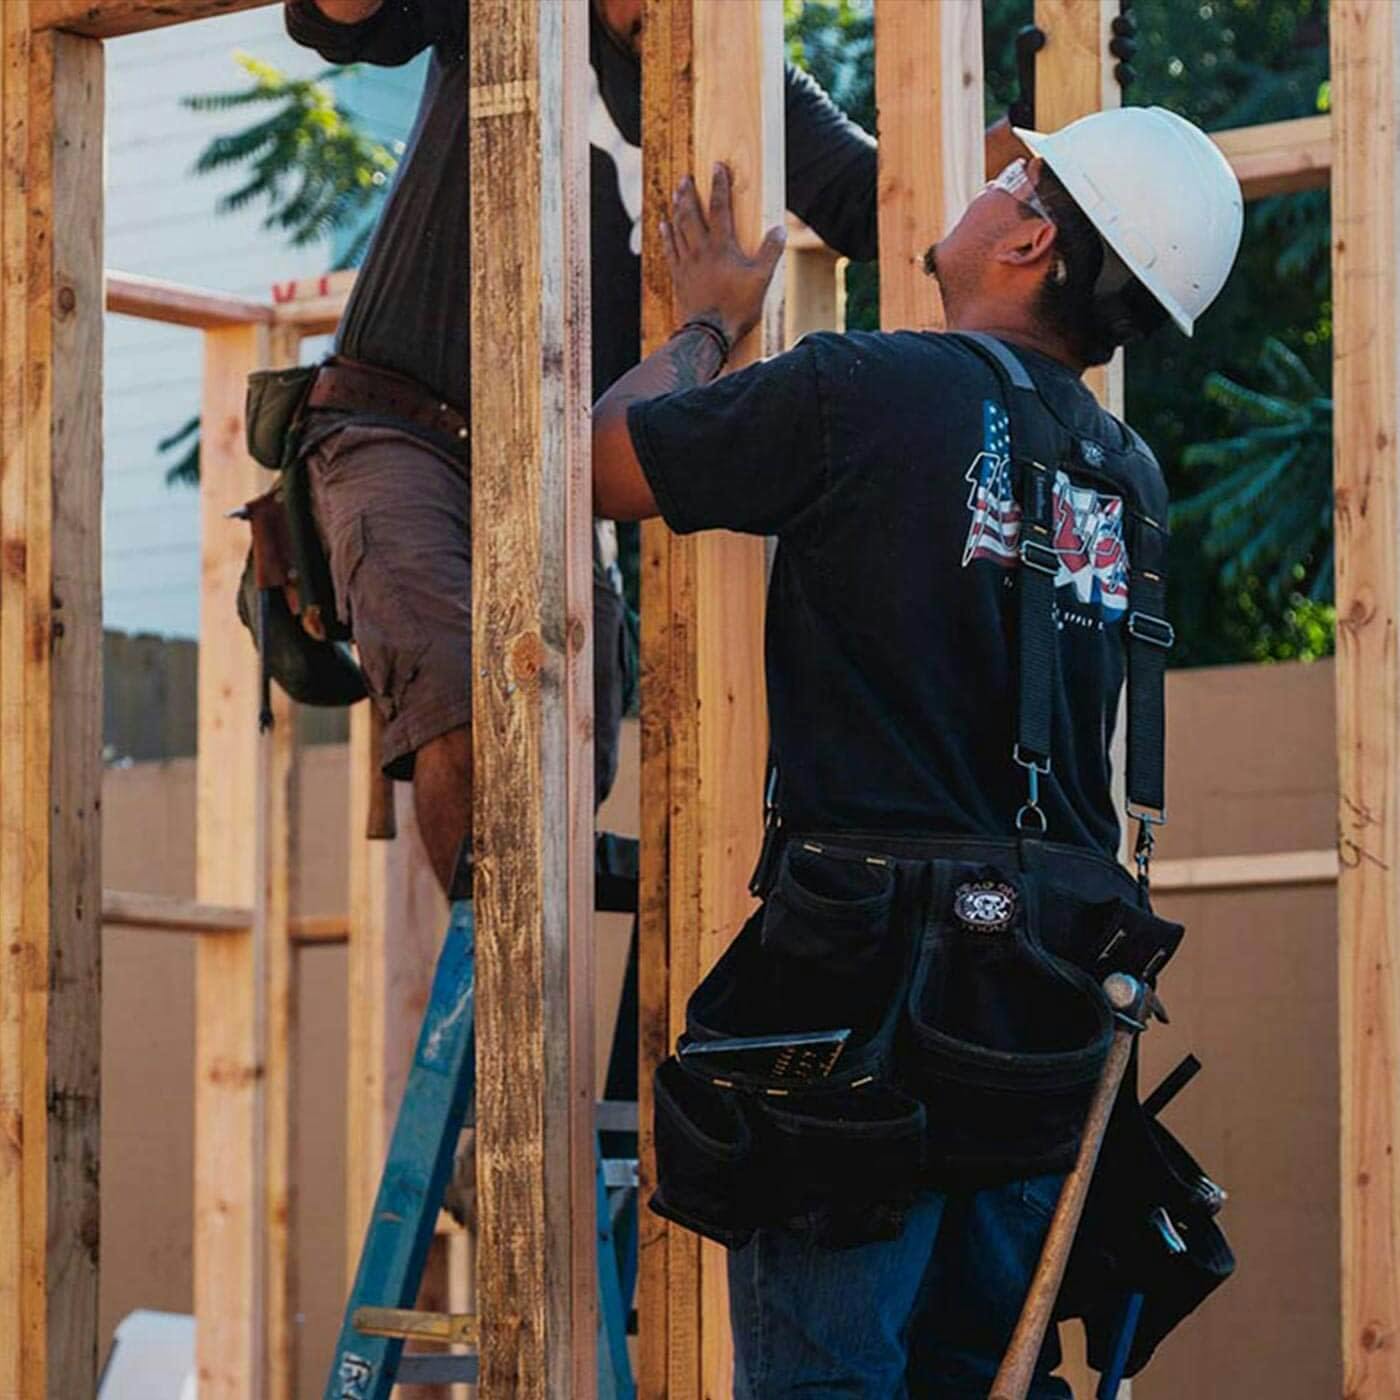 Construction workers framing a building